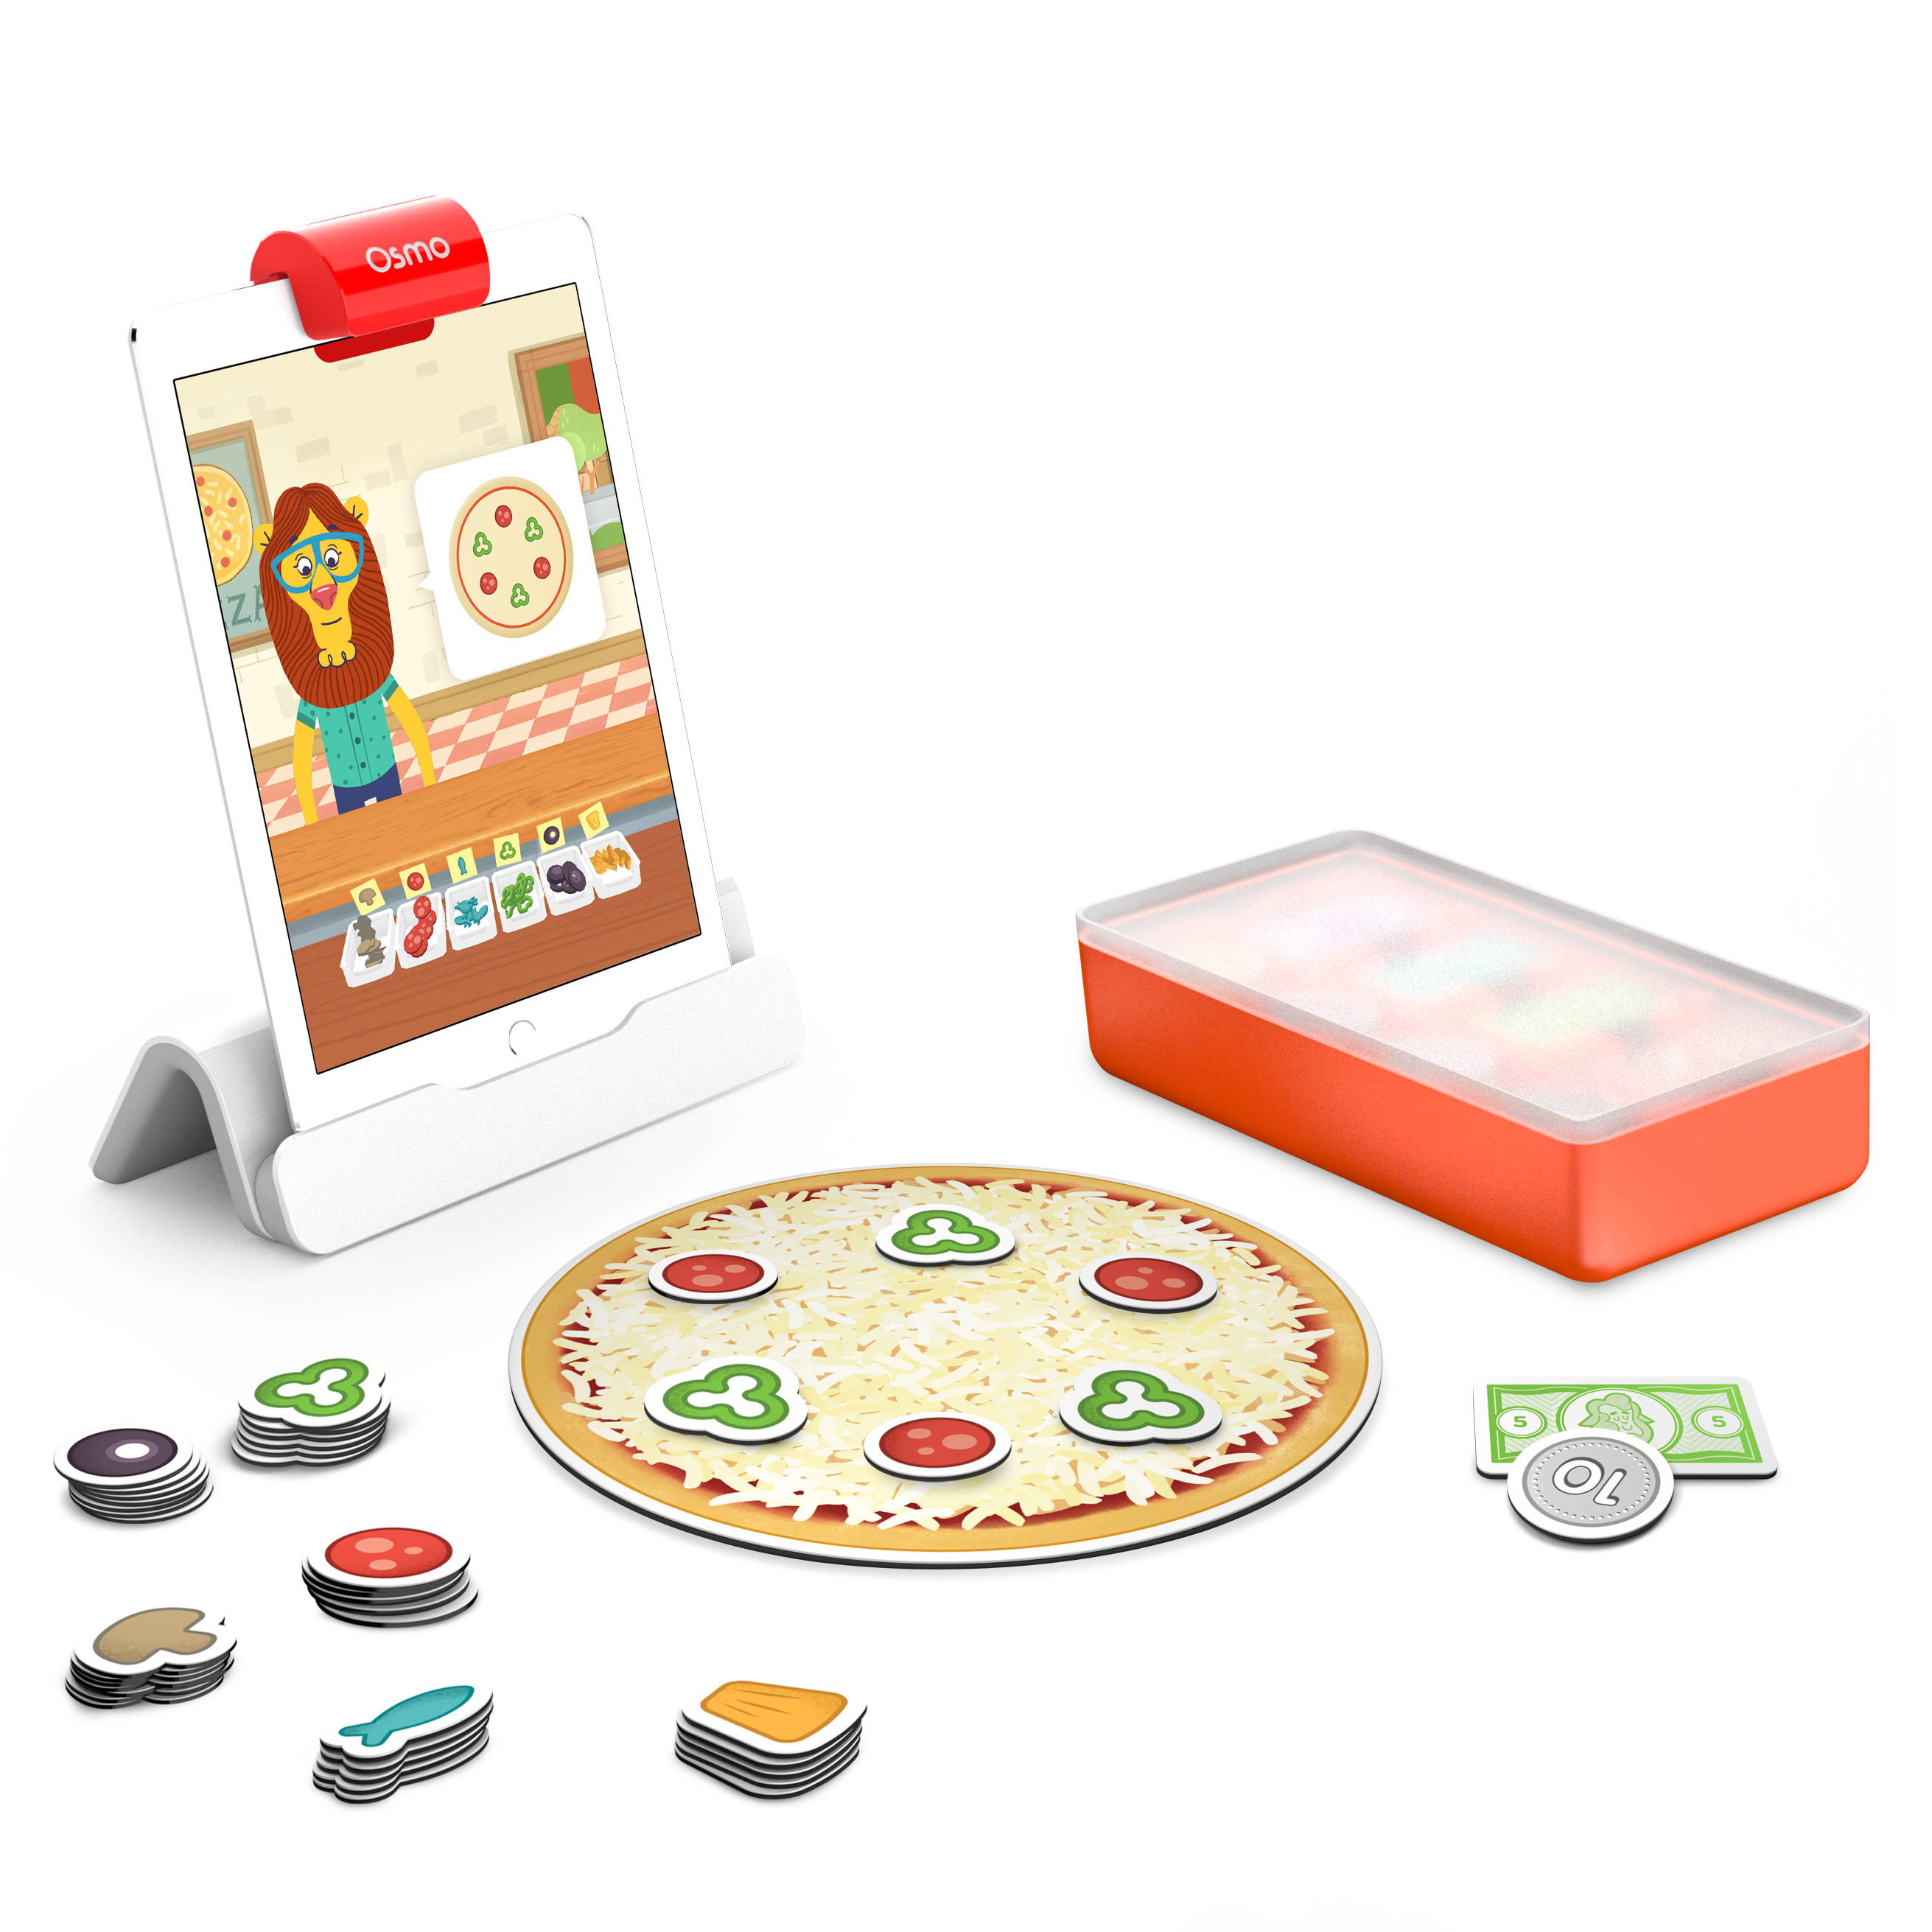 Picture of Osmo Pizza Co. Game